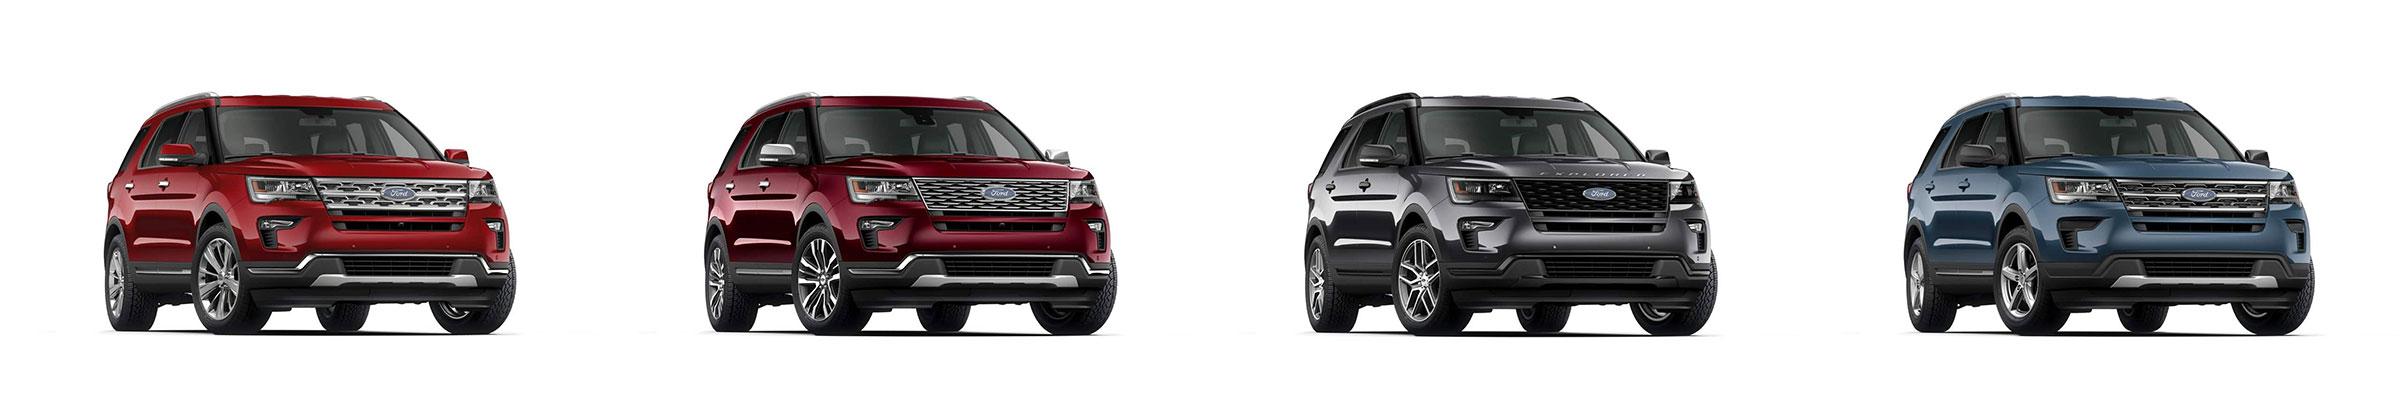 2019 Ford Explorer Trims and Options